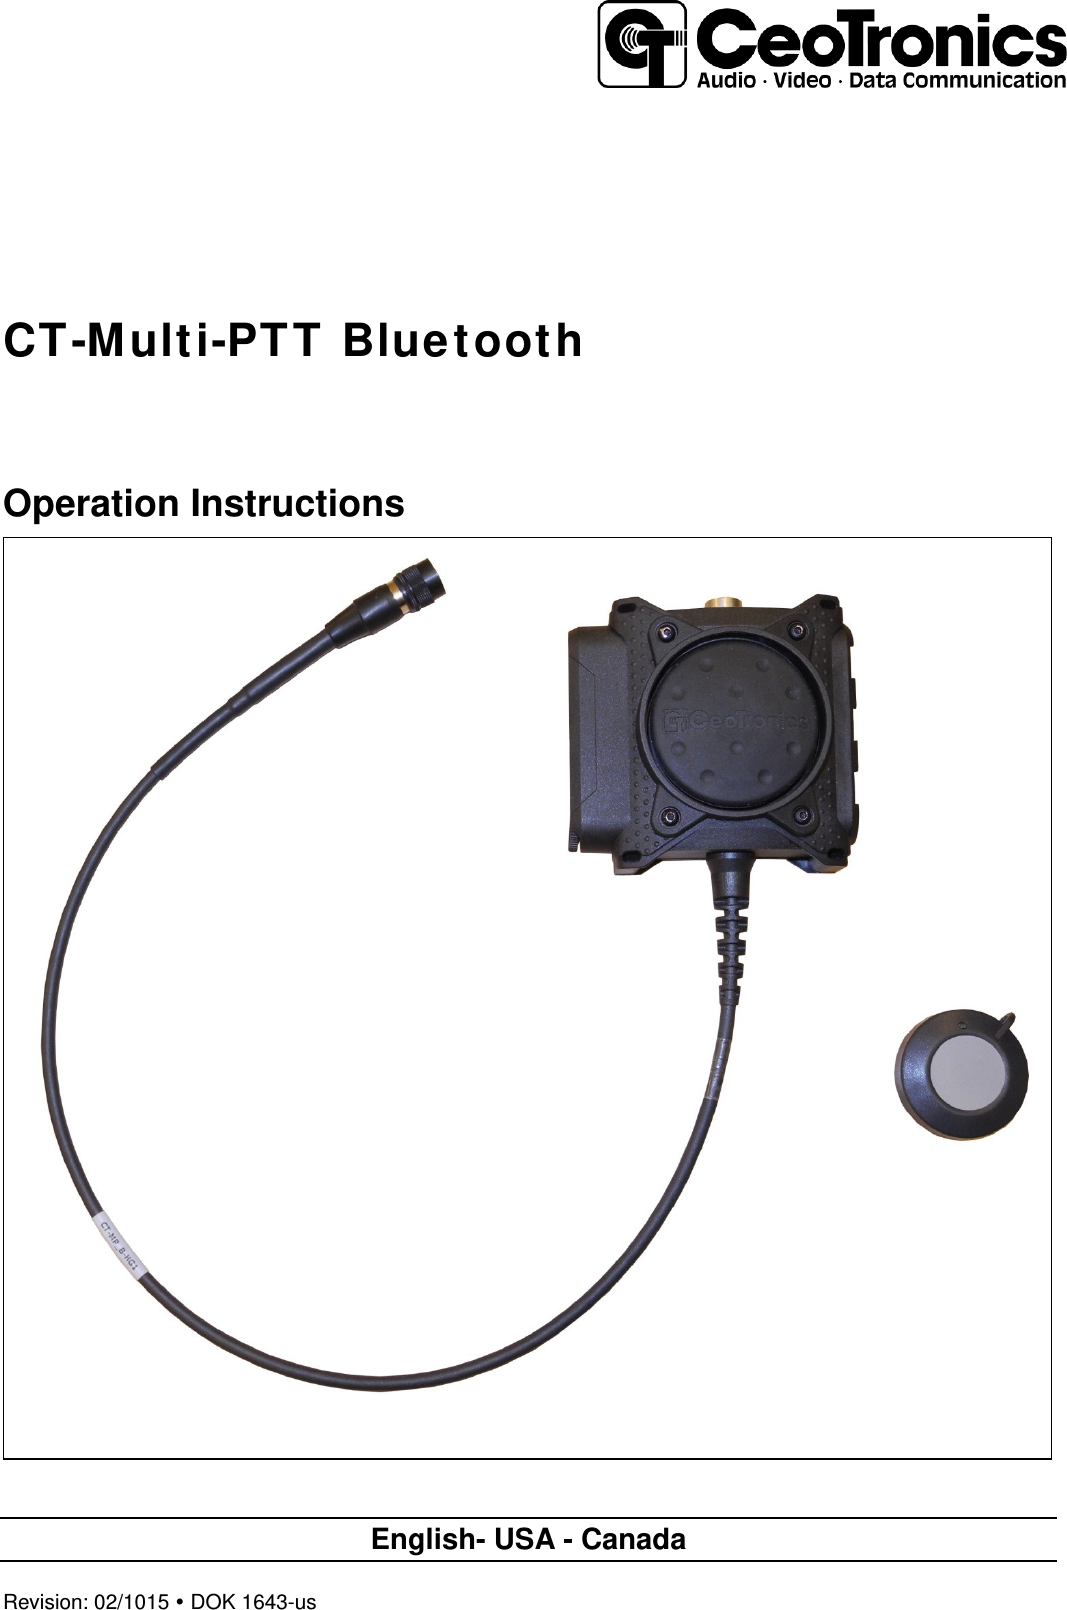  Revision: 02/1015  DOK 1643-us        CT-Multi-PTT Bluetooth    Operation Instructions      English- USA - Canada 